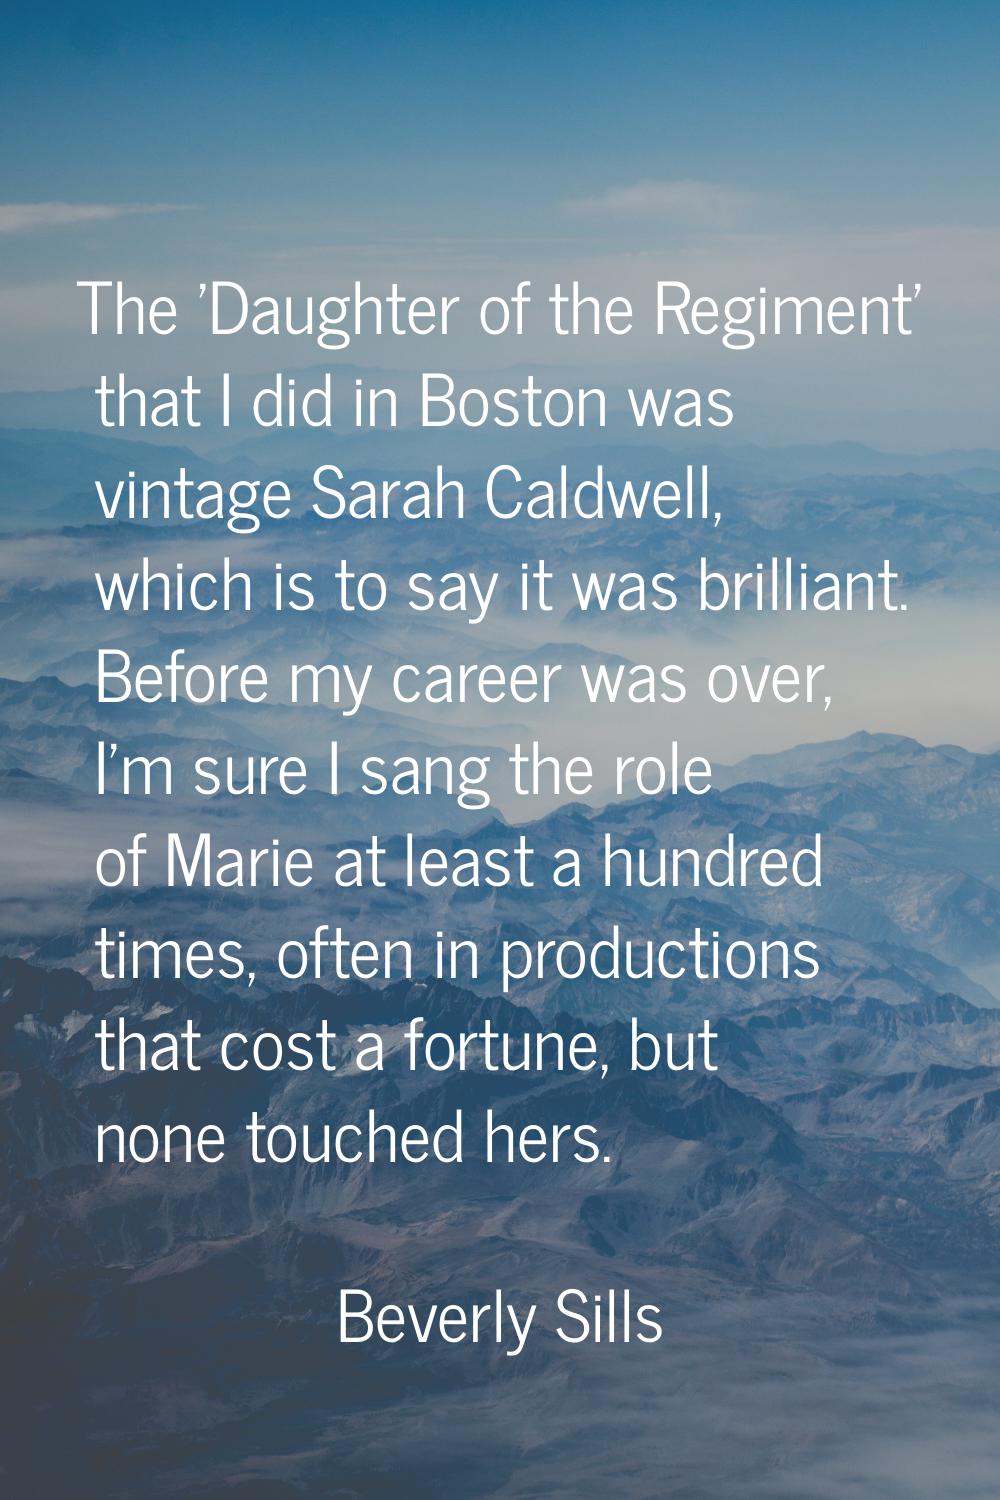 The 'Daughter of the Regiment' that I did in Boston was vintage Sarah Caldwell, which is to say it 